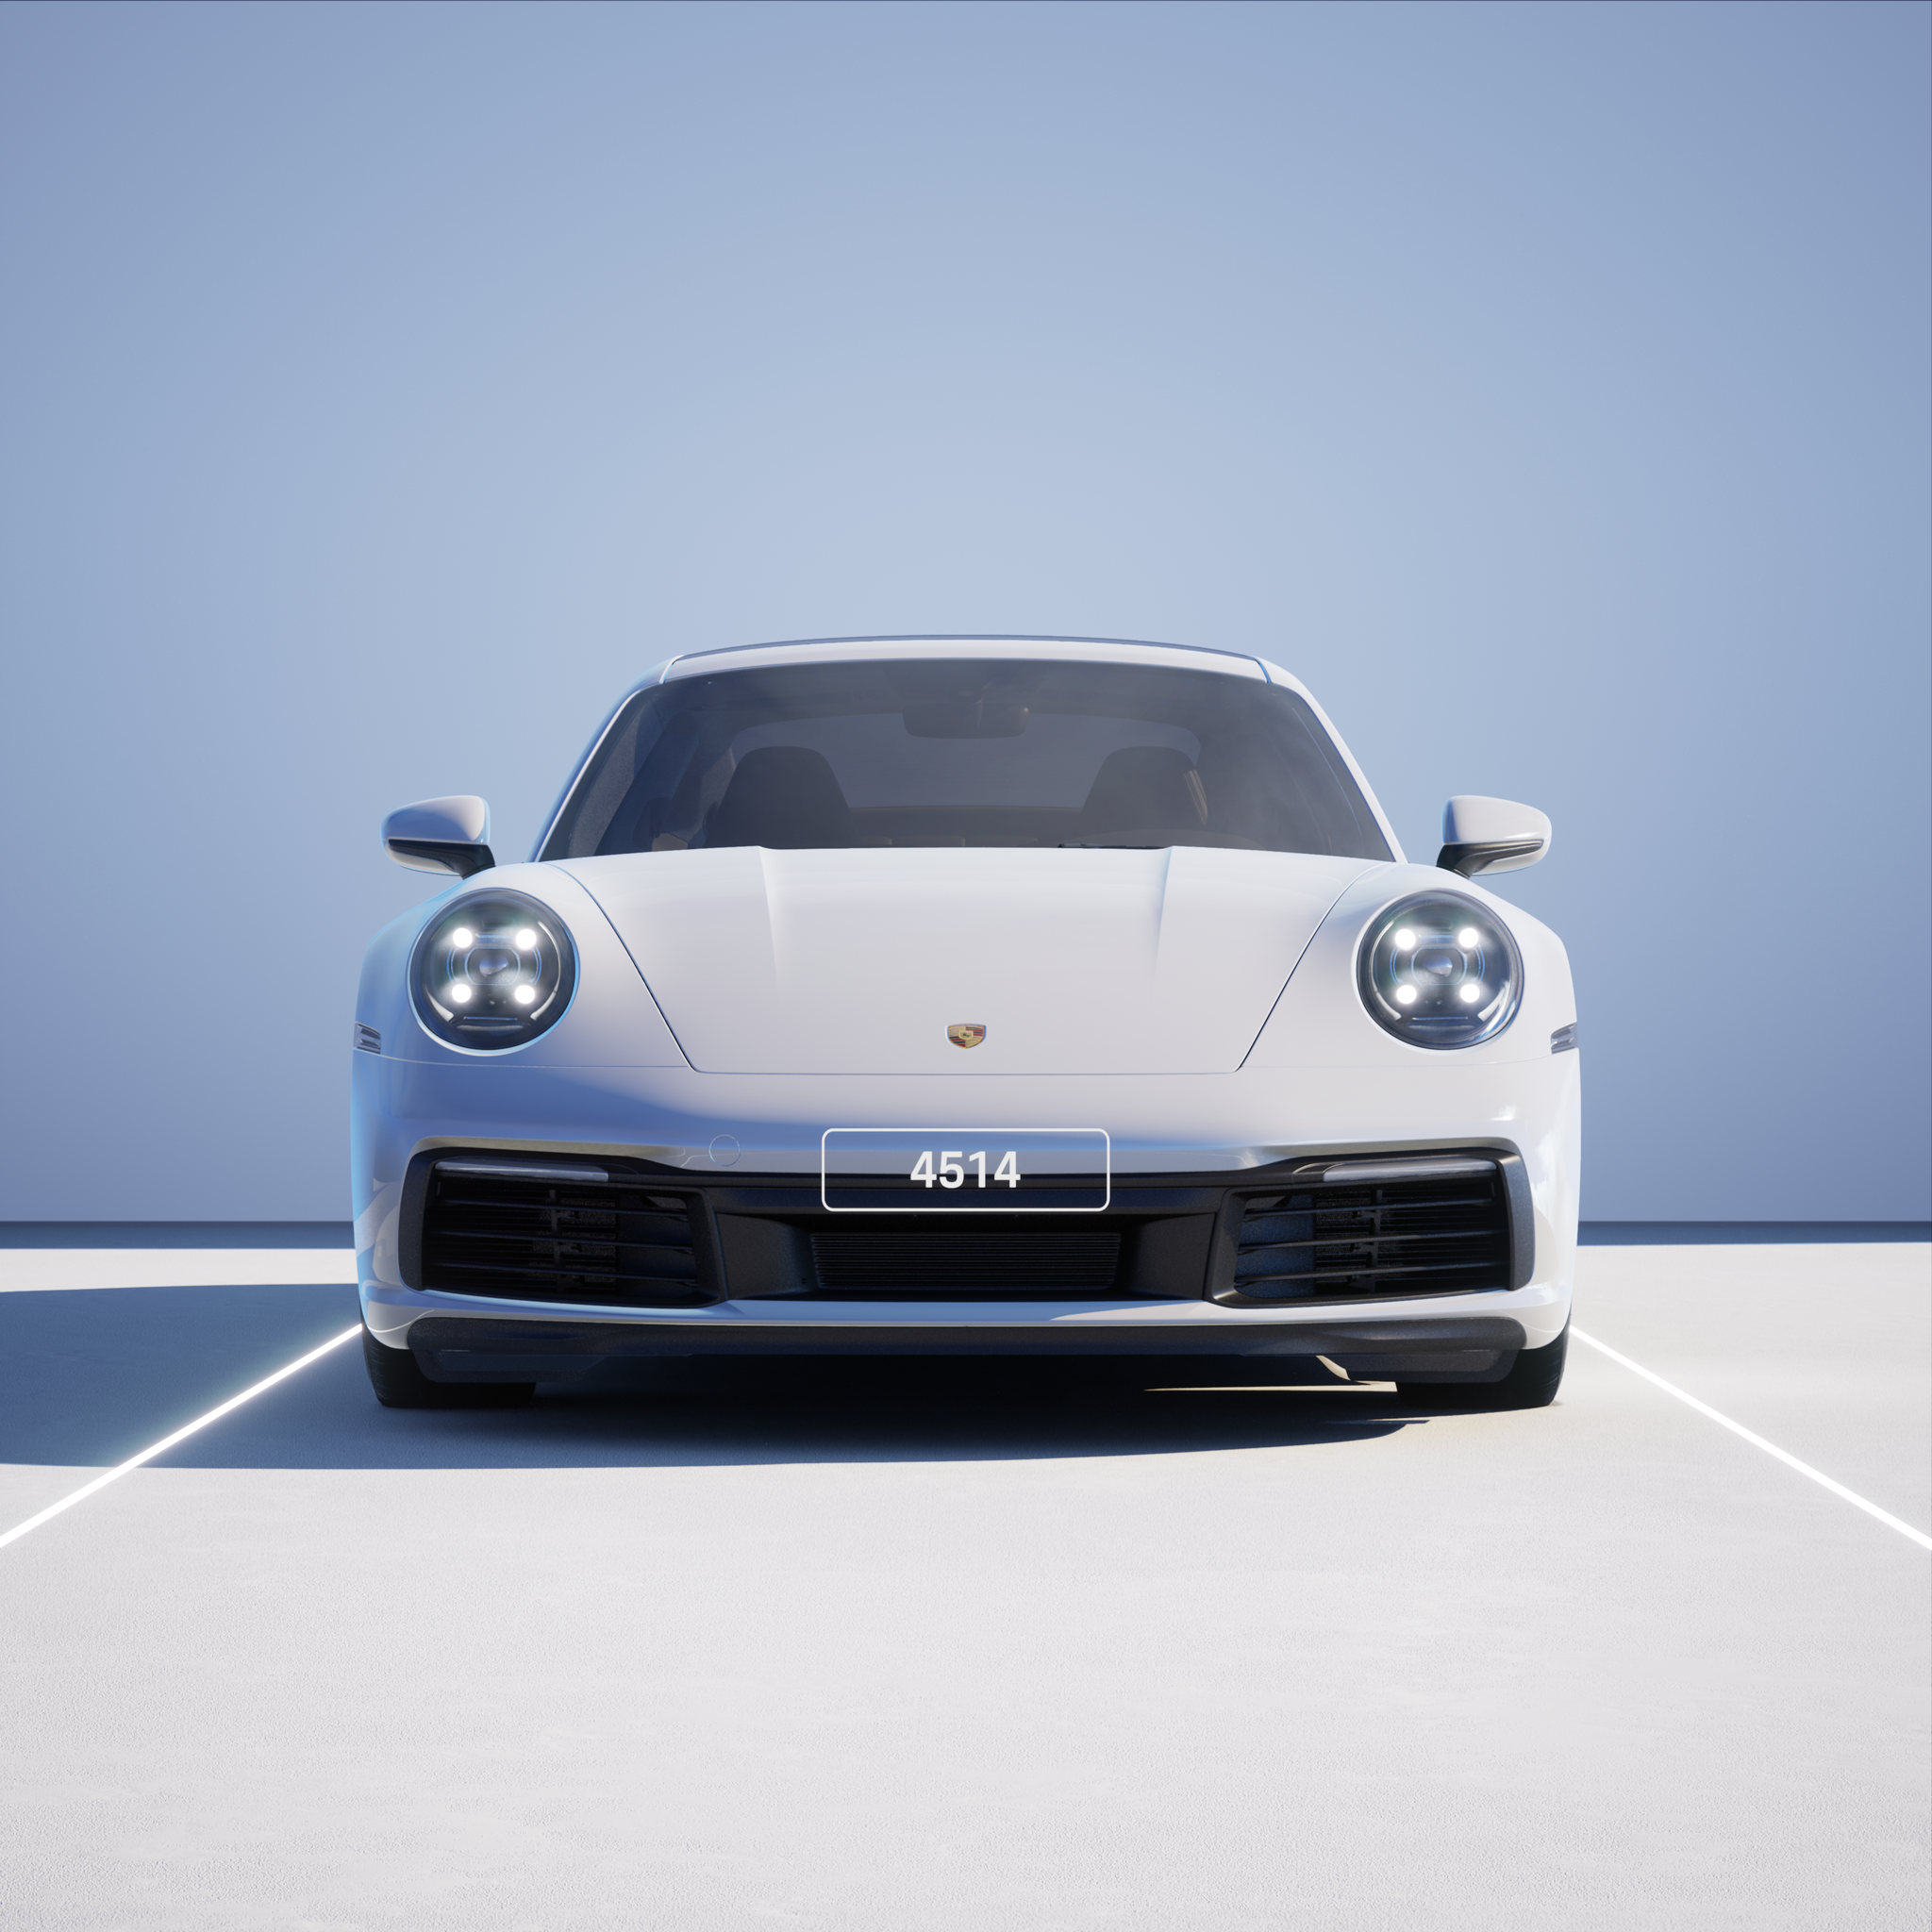 The PORSCHΞ 911 4514 image in phase